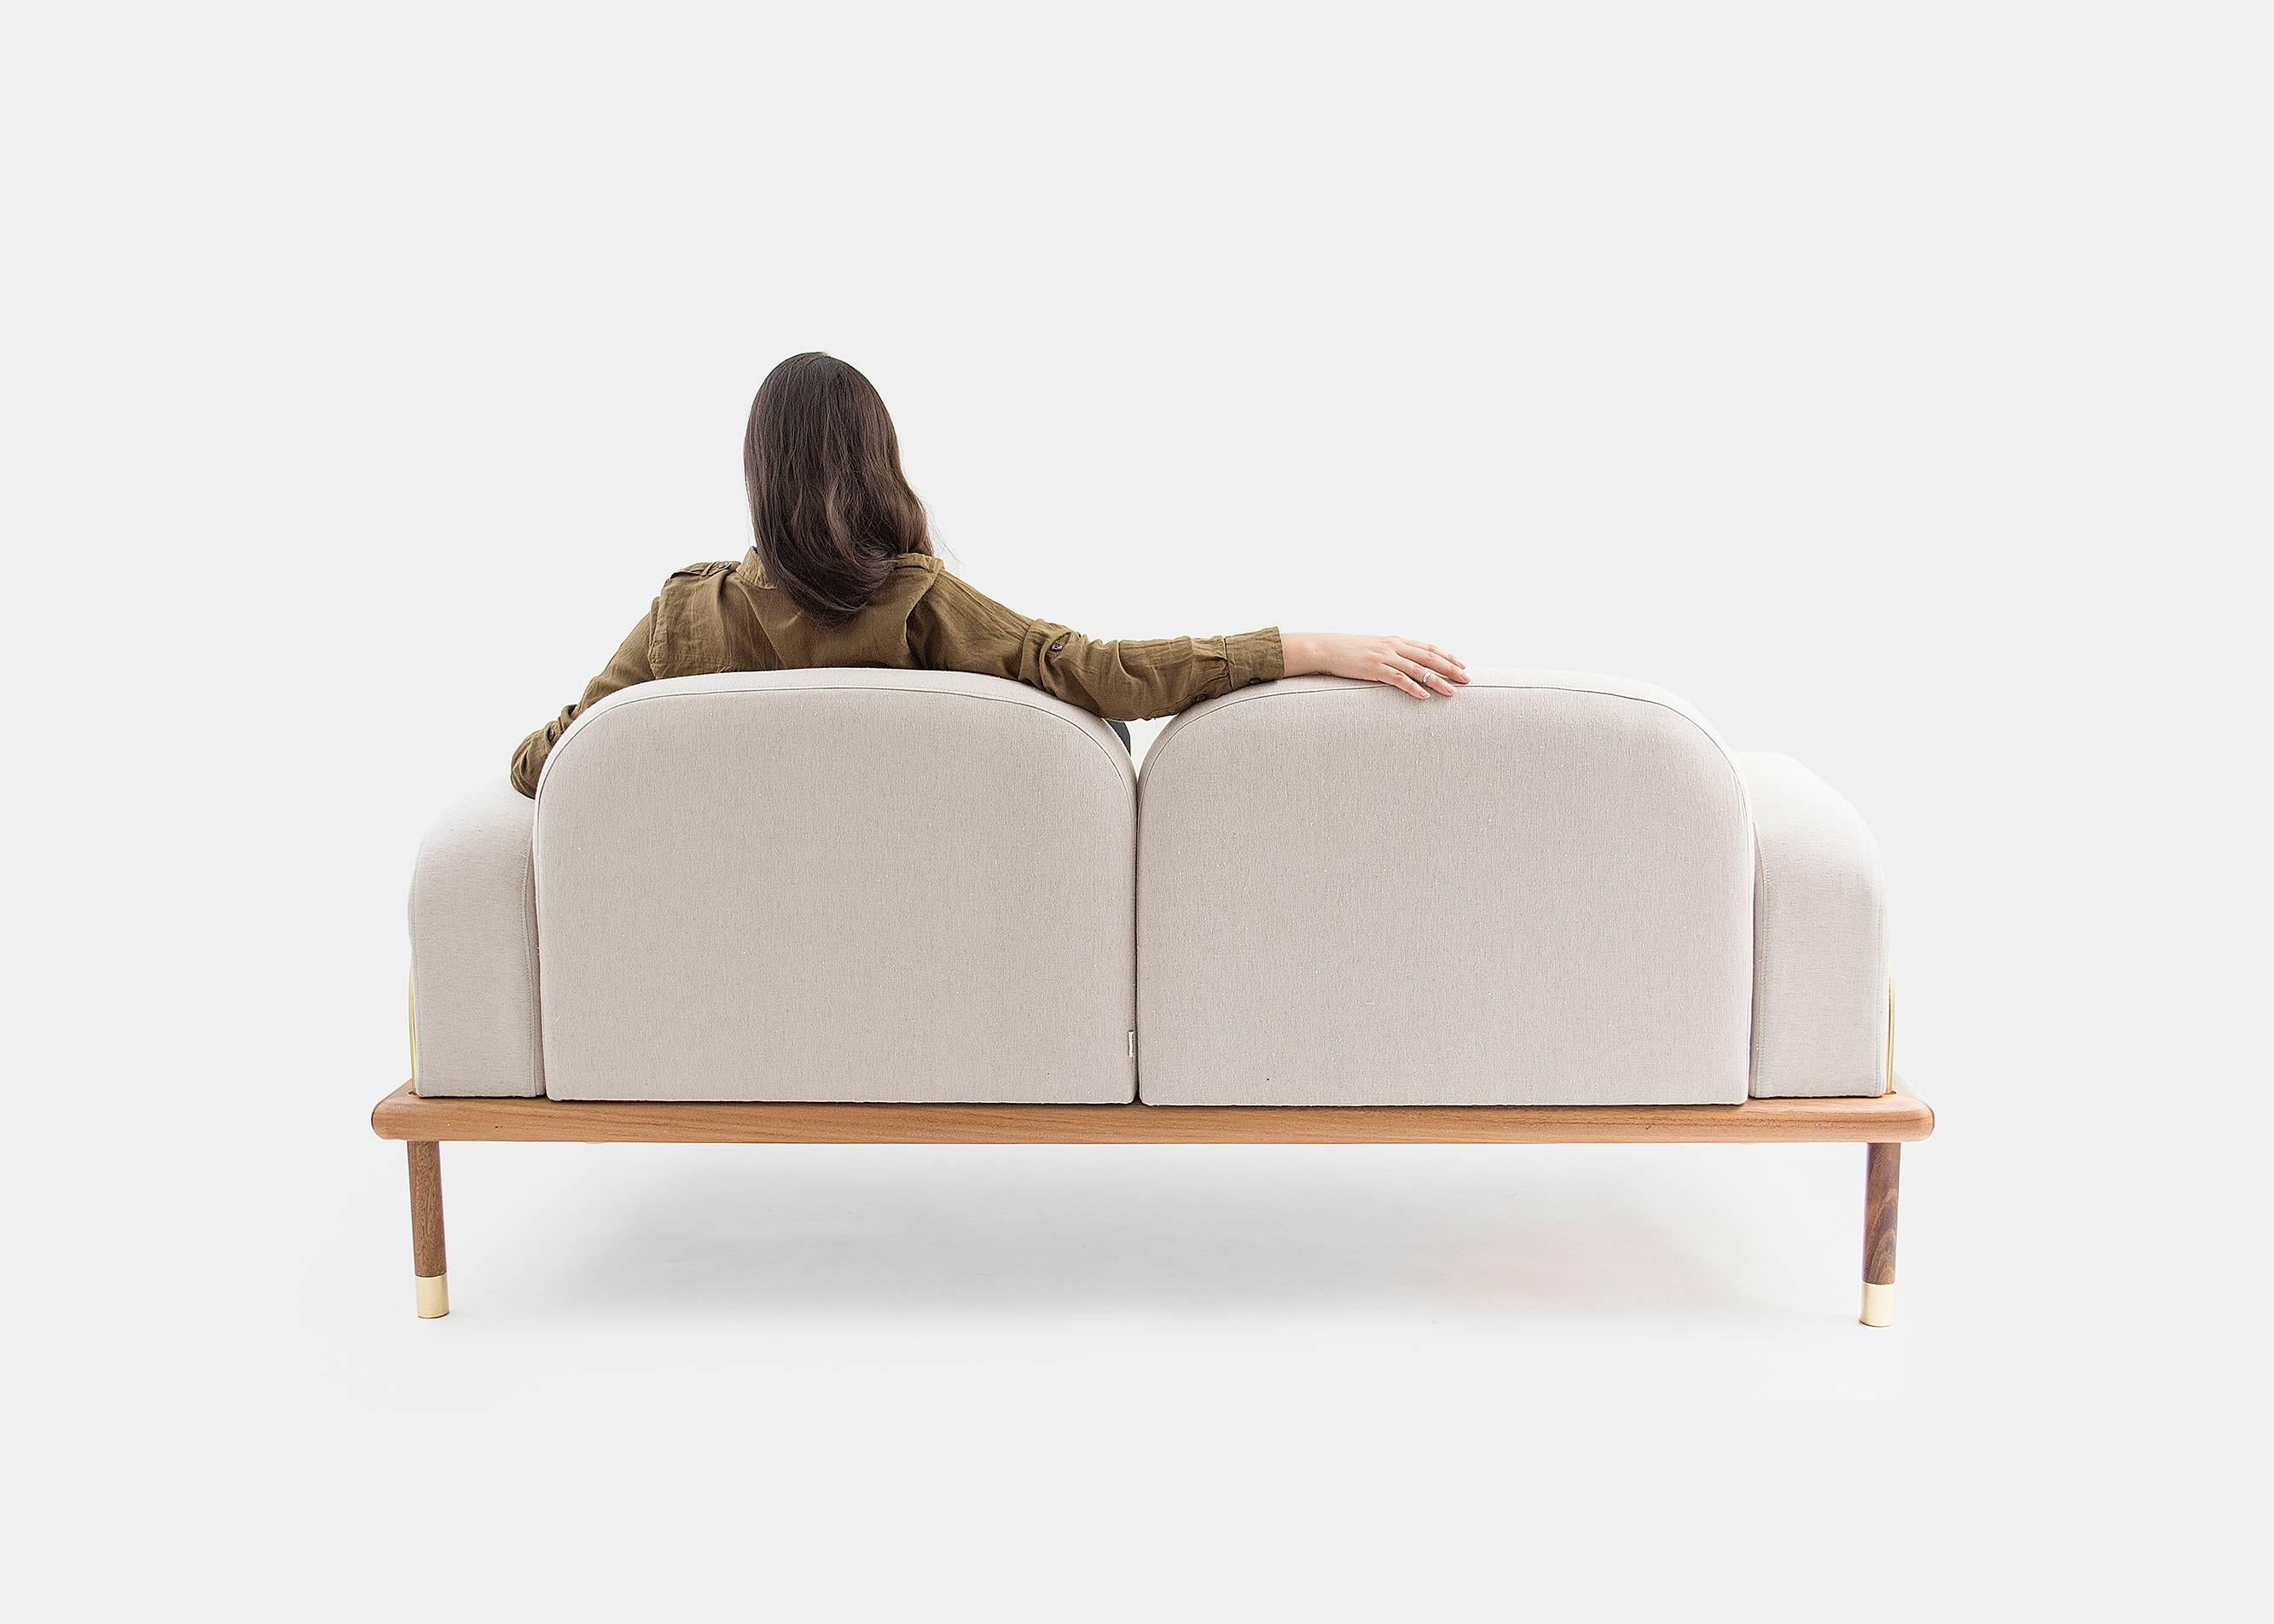 Copper Prado/Sofa in Parota Wood and Details in Cooper or Brass For Sale